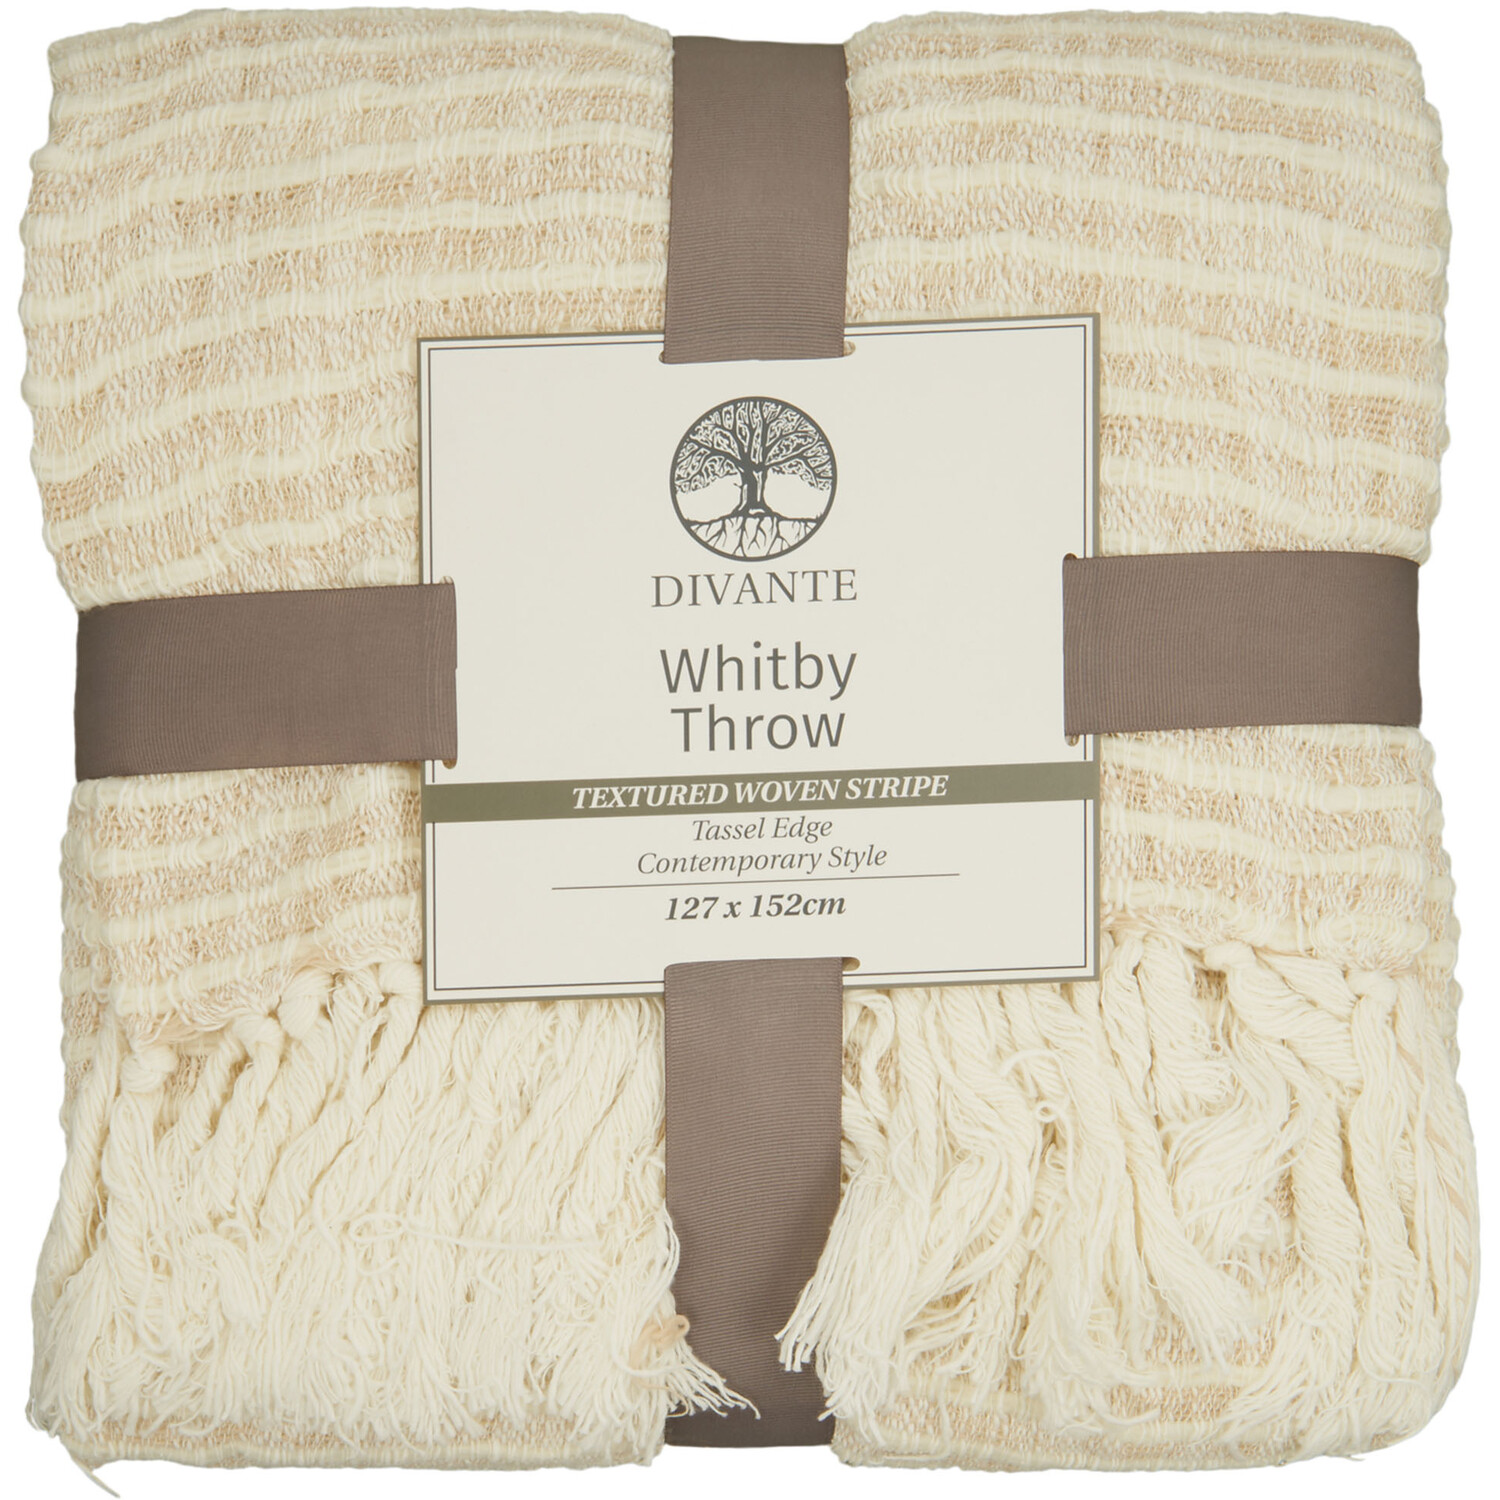 Whitby Throw - Natural Image 1